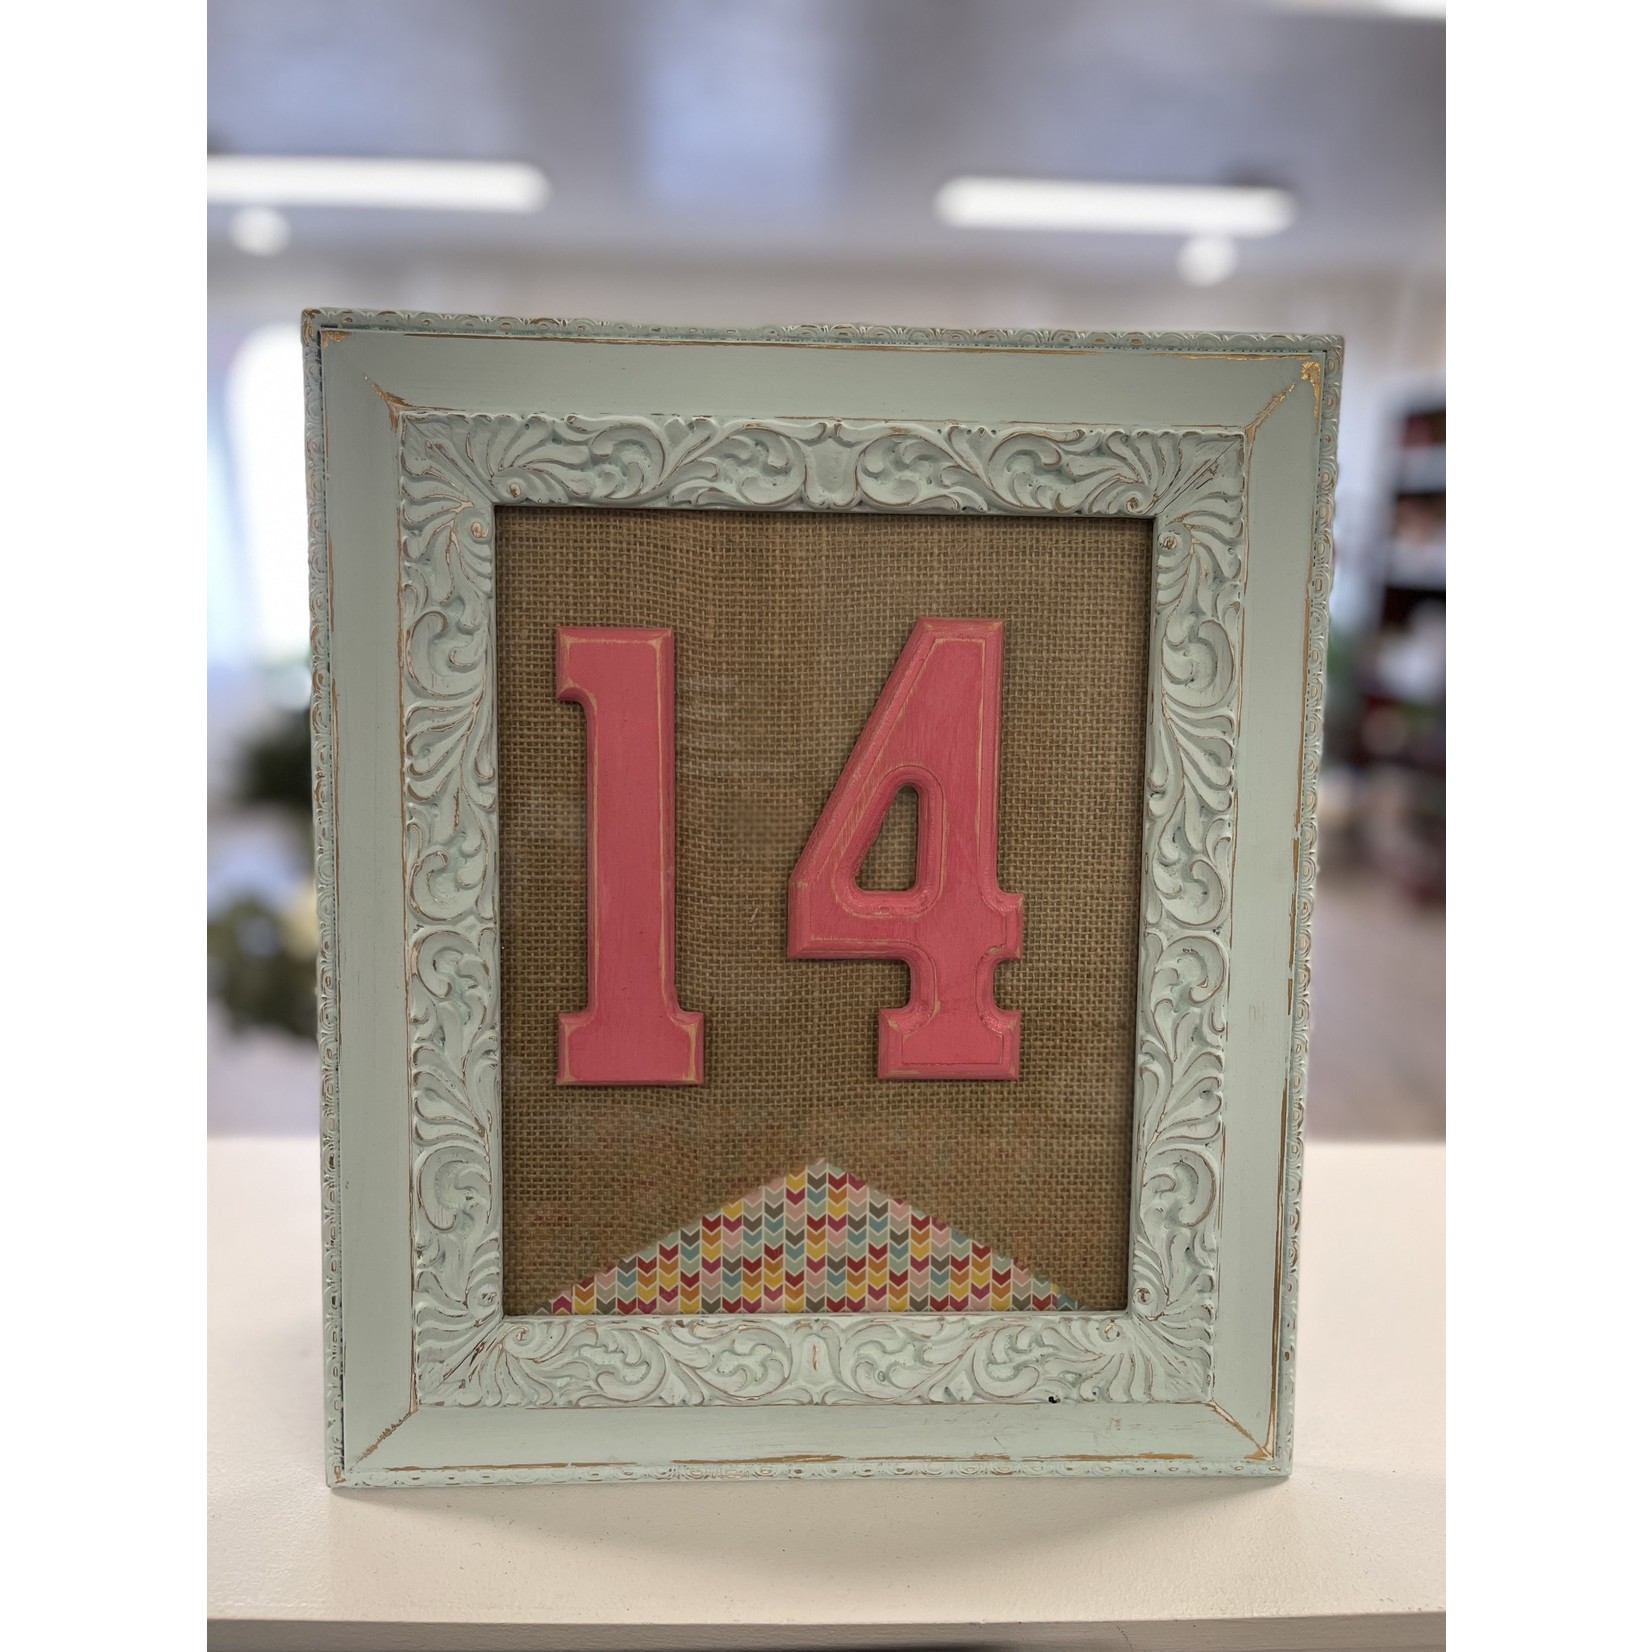 Home Valentine's Day Decor "14" in a 8 x 10 Frame